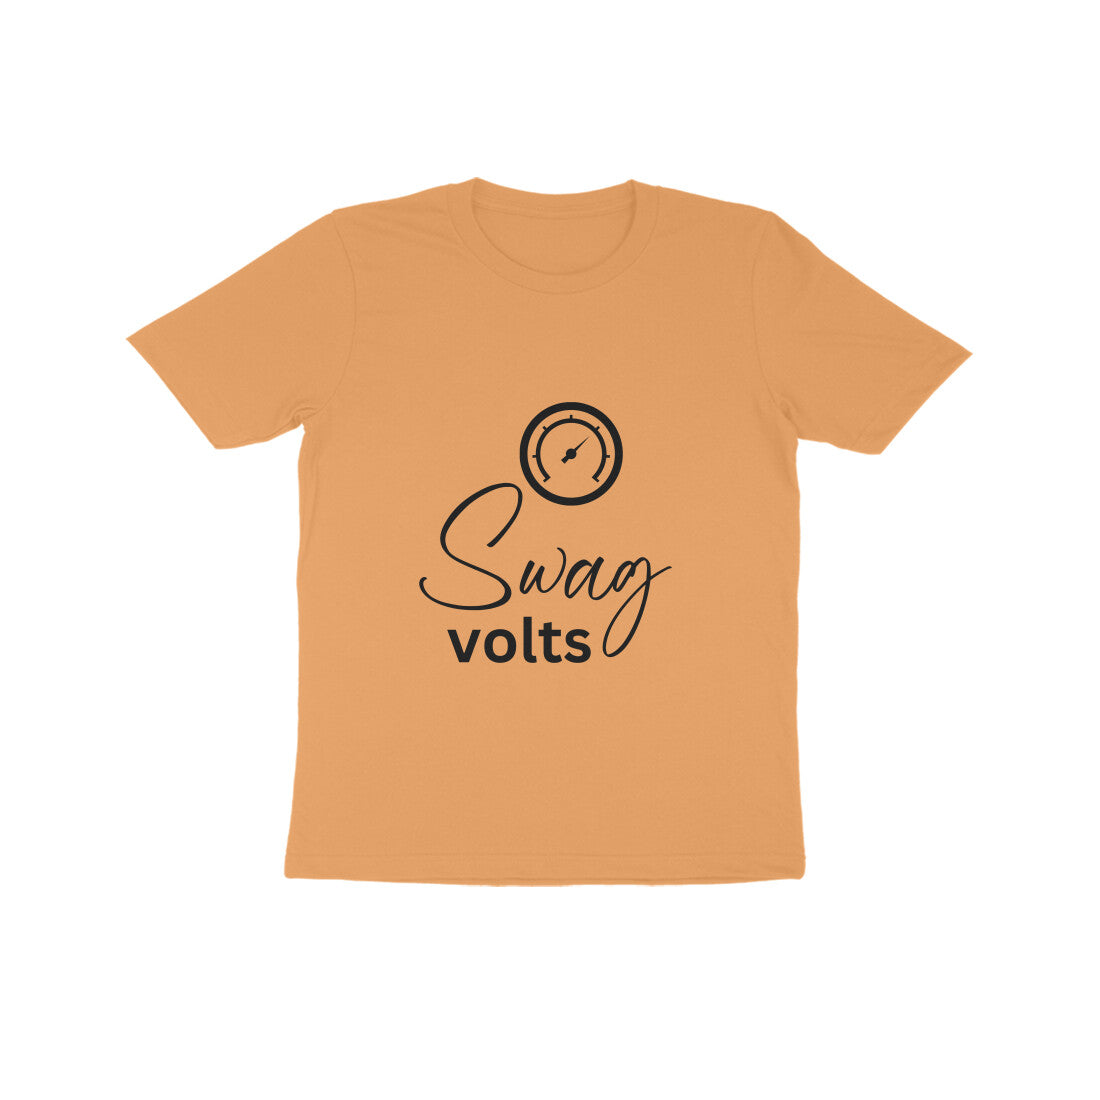 Swag volts' Kids tee